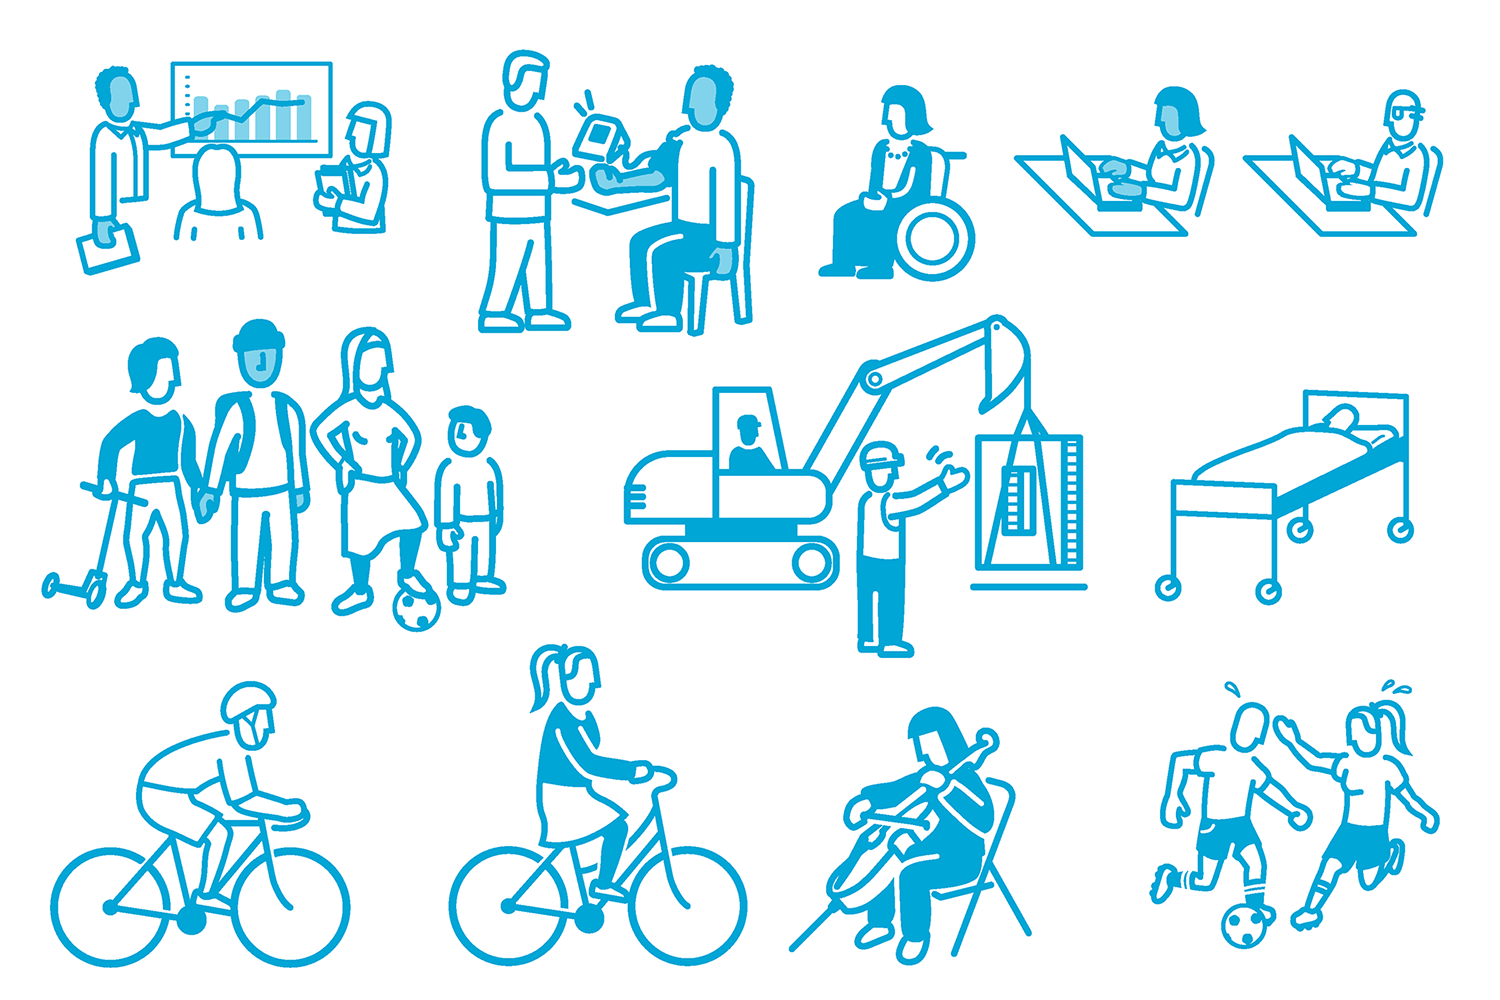 Various examples of pictograms depicting people in different activities and environments.